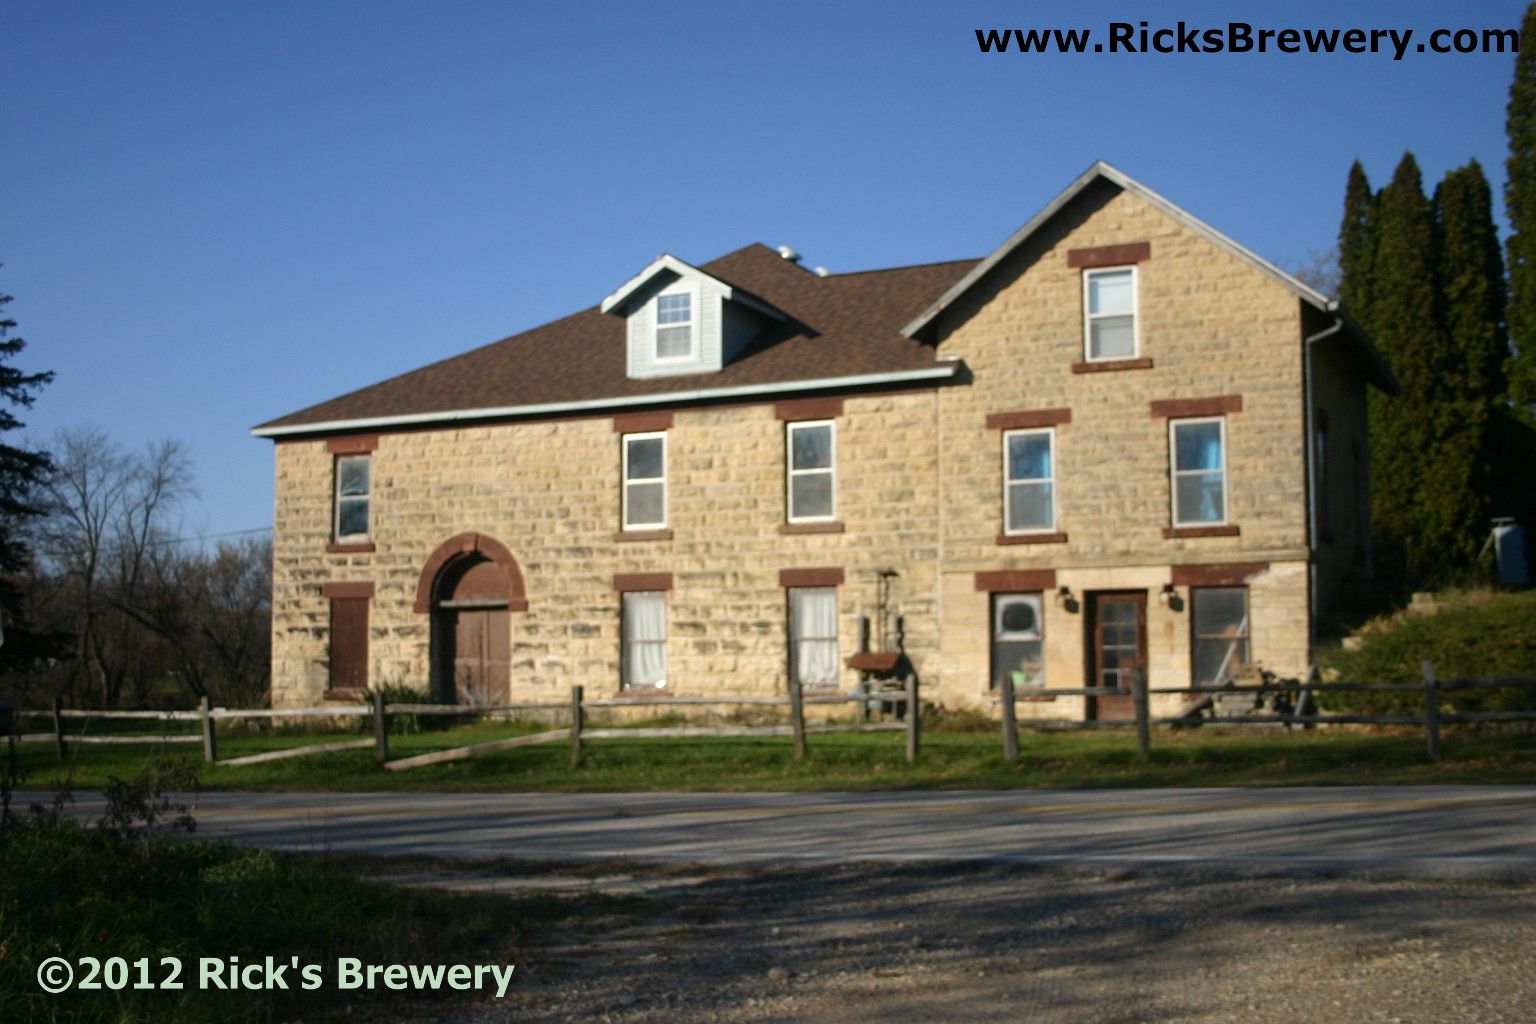 Rick's Brewery south view